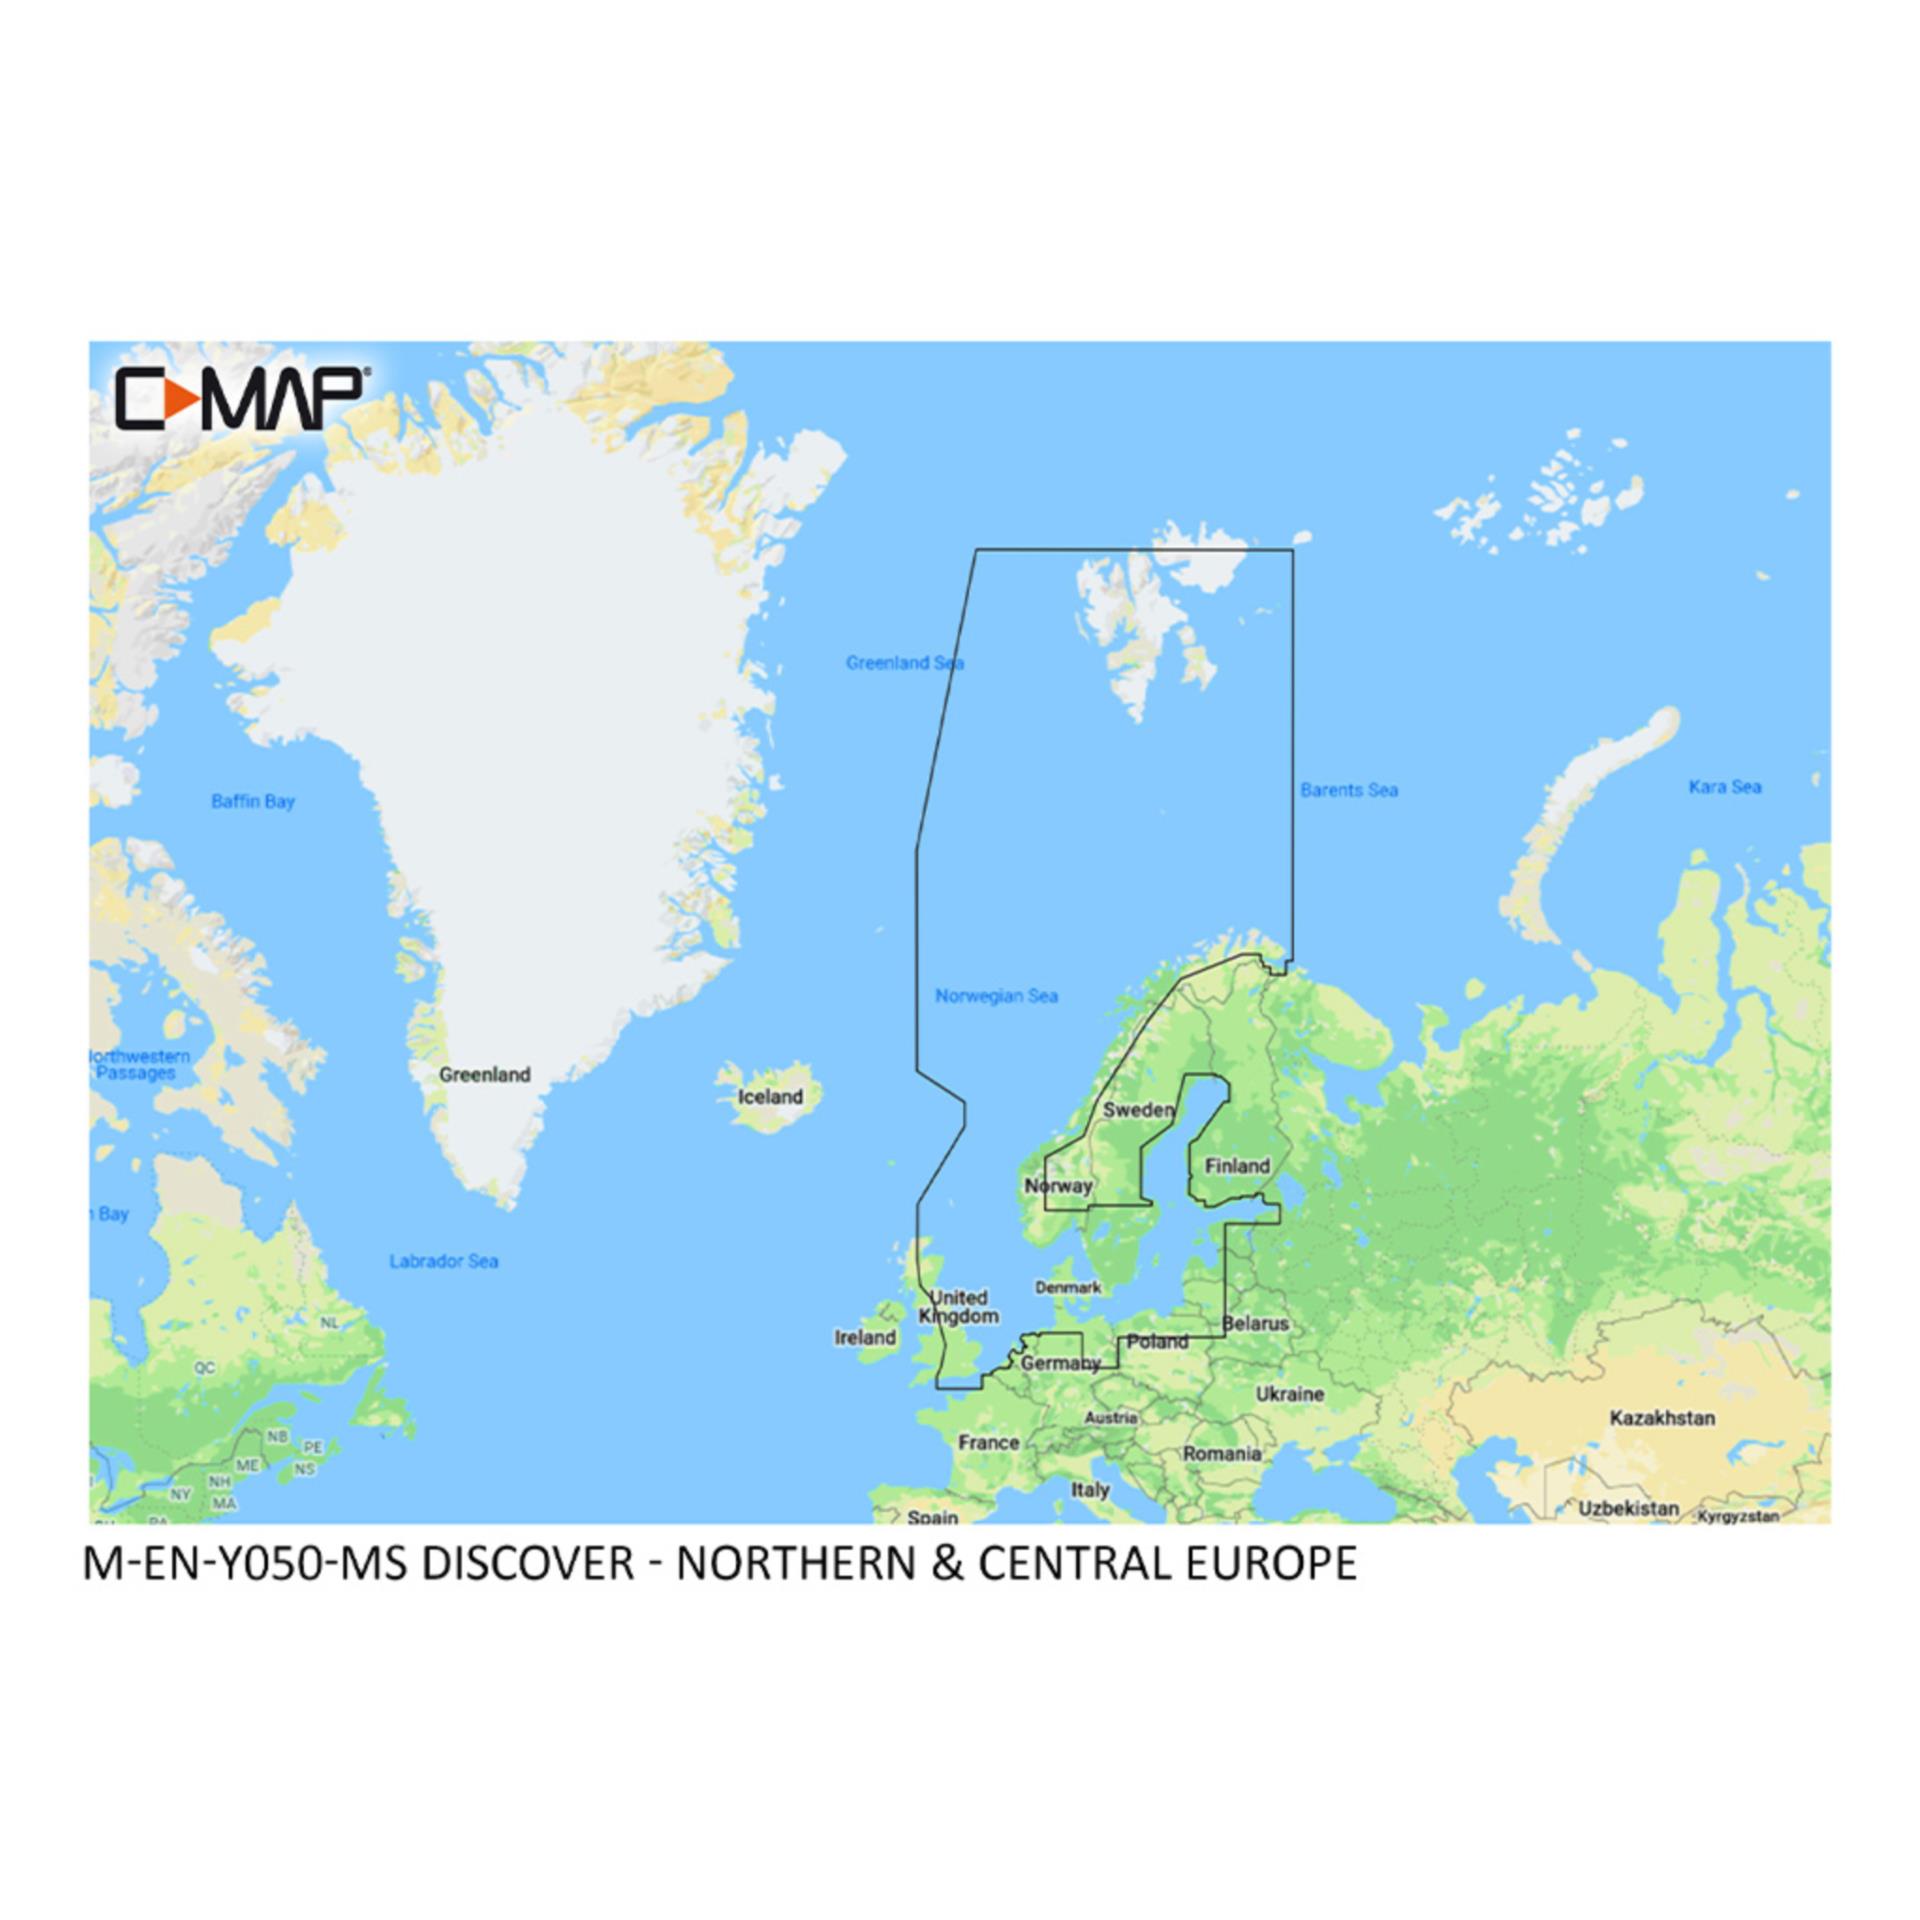 C-MAP NORTH AND CENTRAL EUROPE NSX